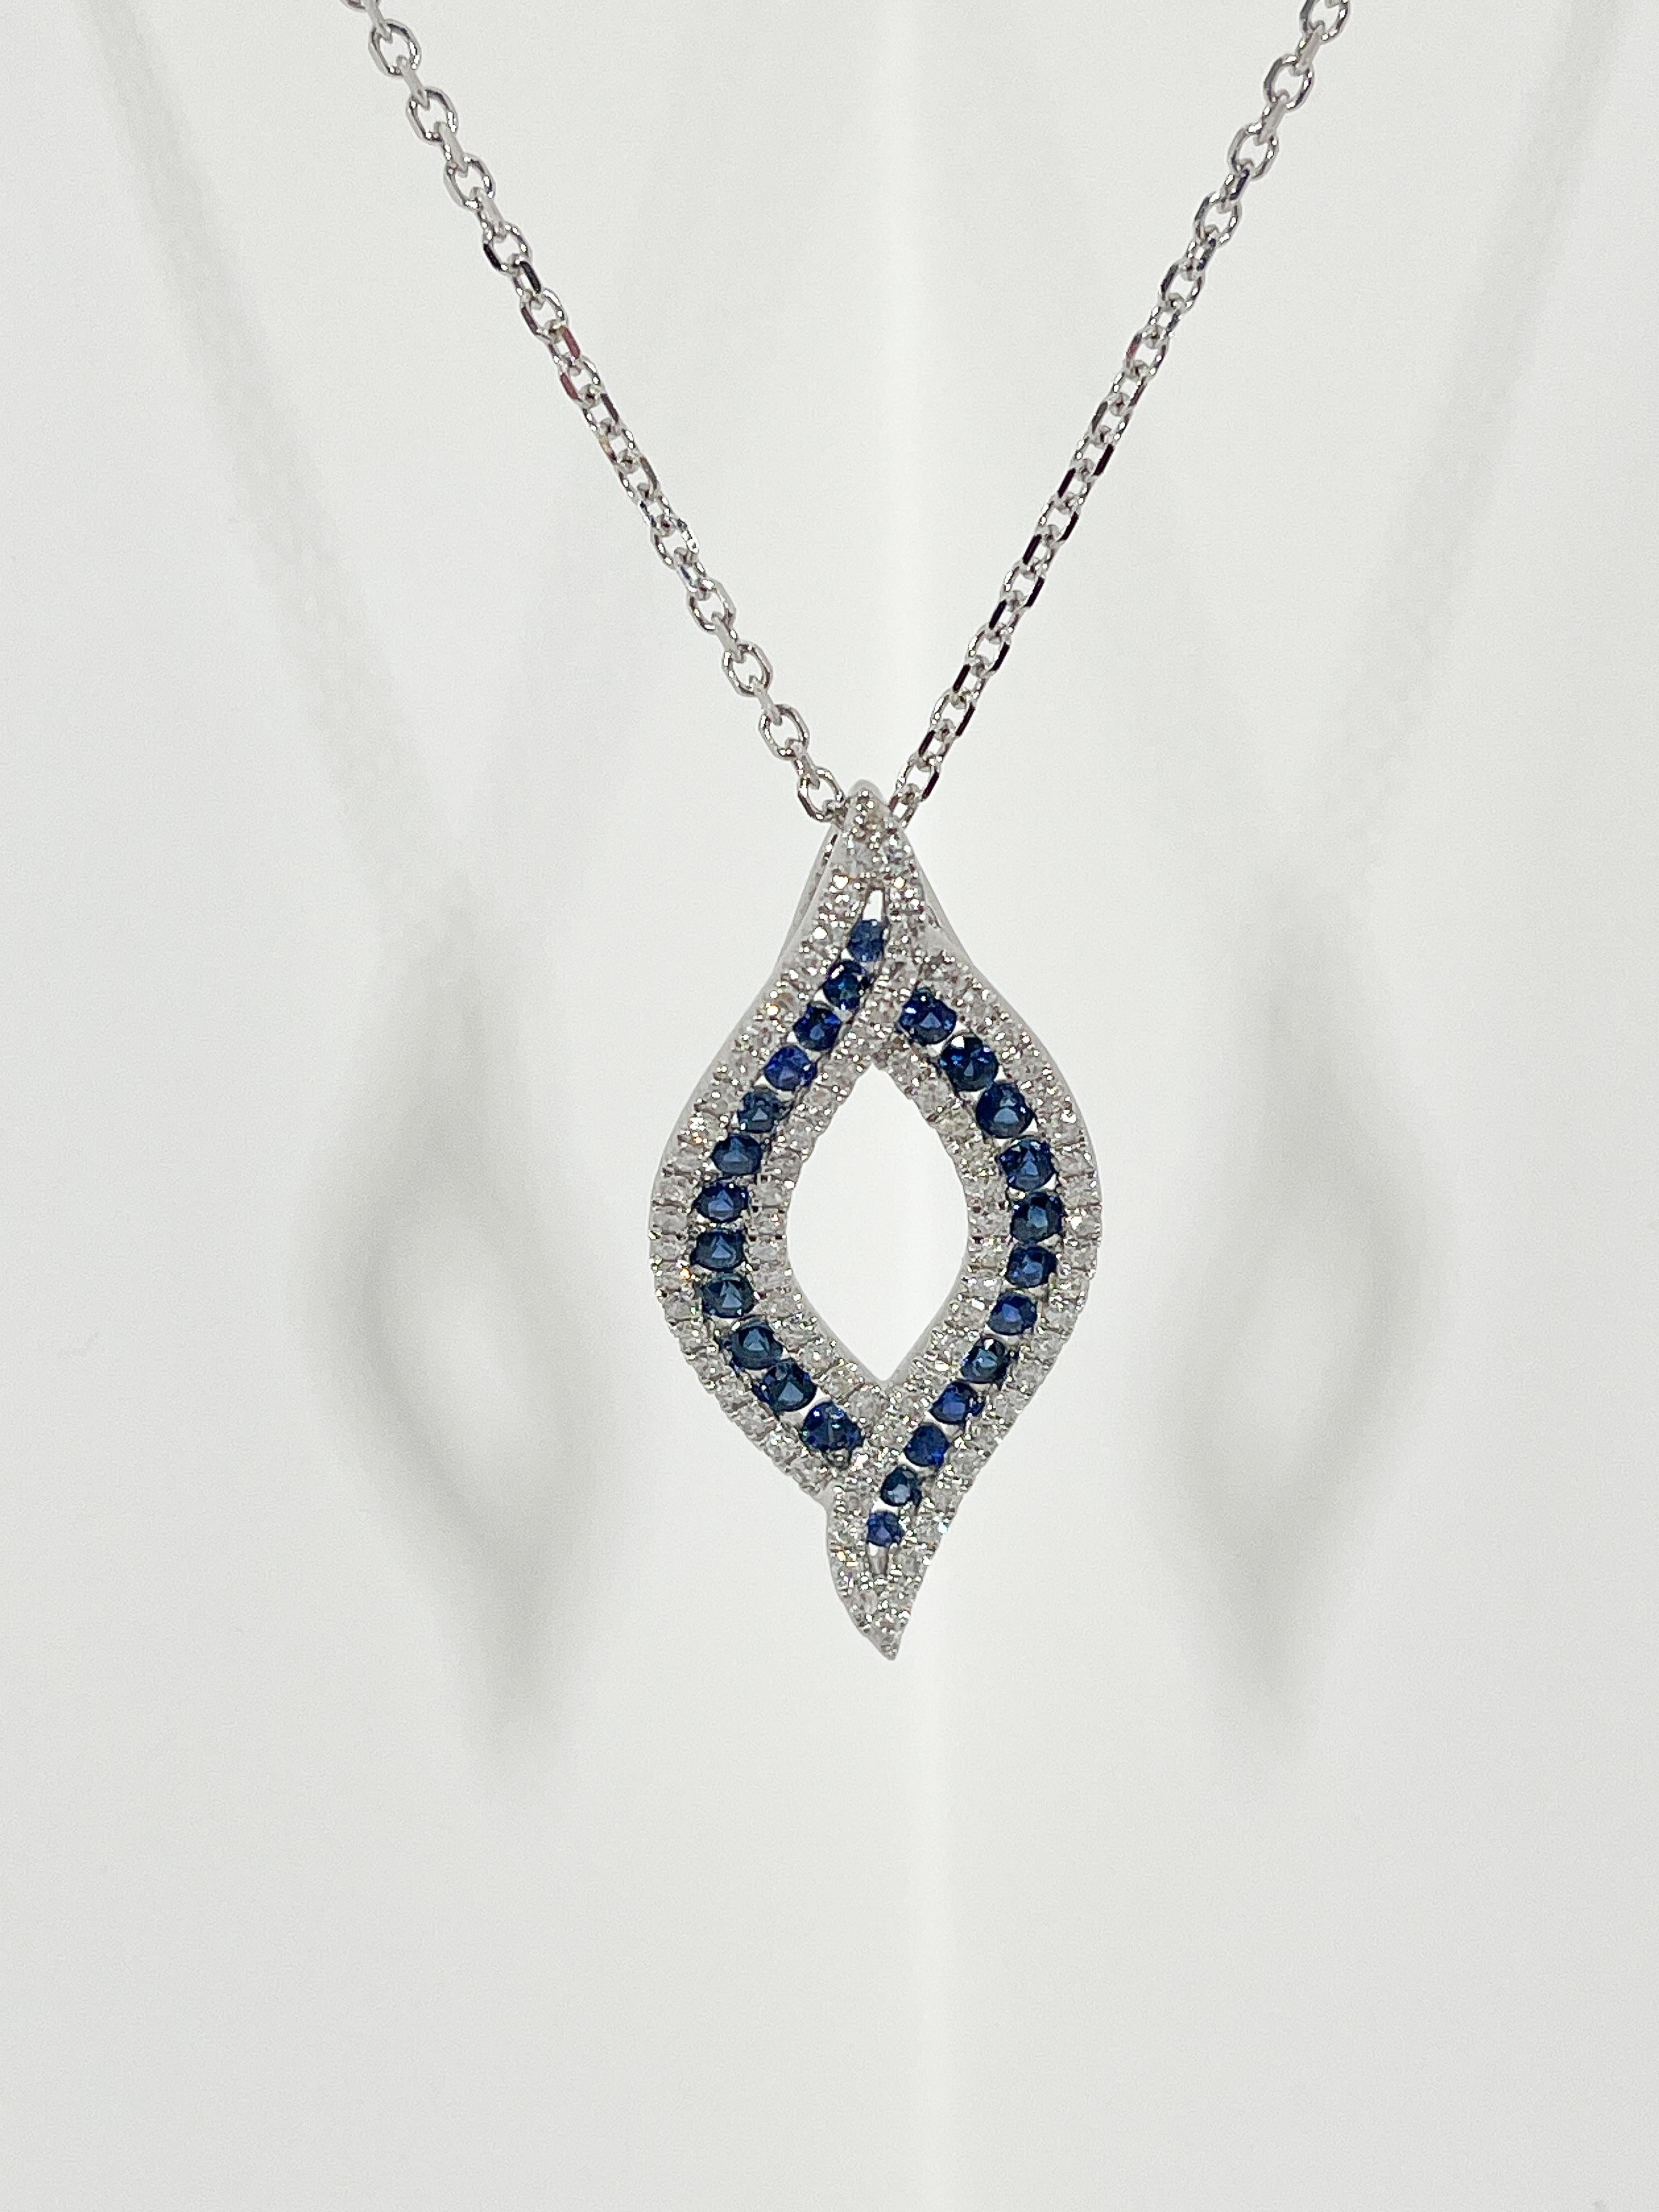 Round Cut 14K White Gold .57 CTW Diamond and .78 CTW Sapphire Pendant Necklace. For Sale